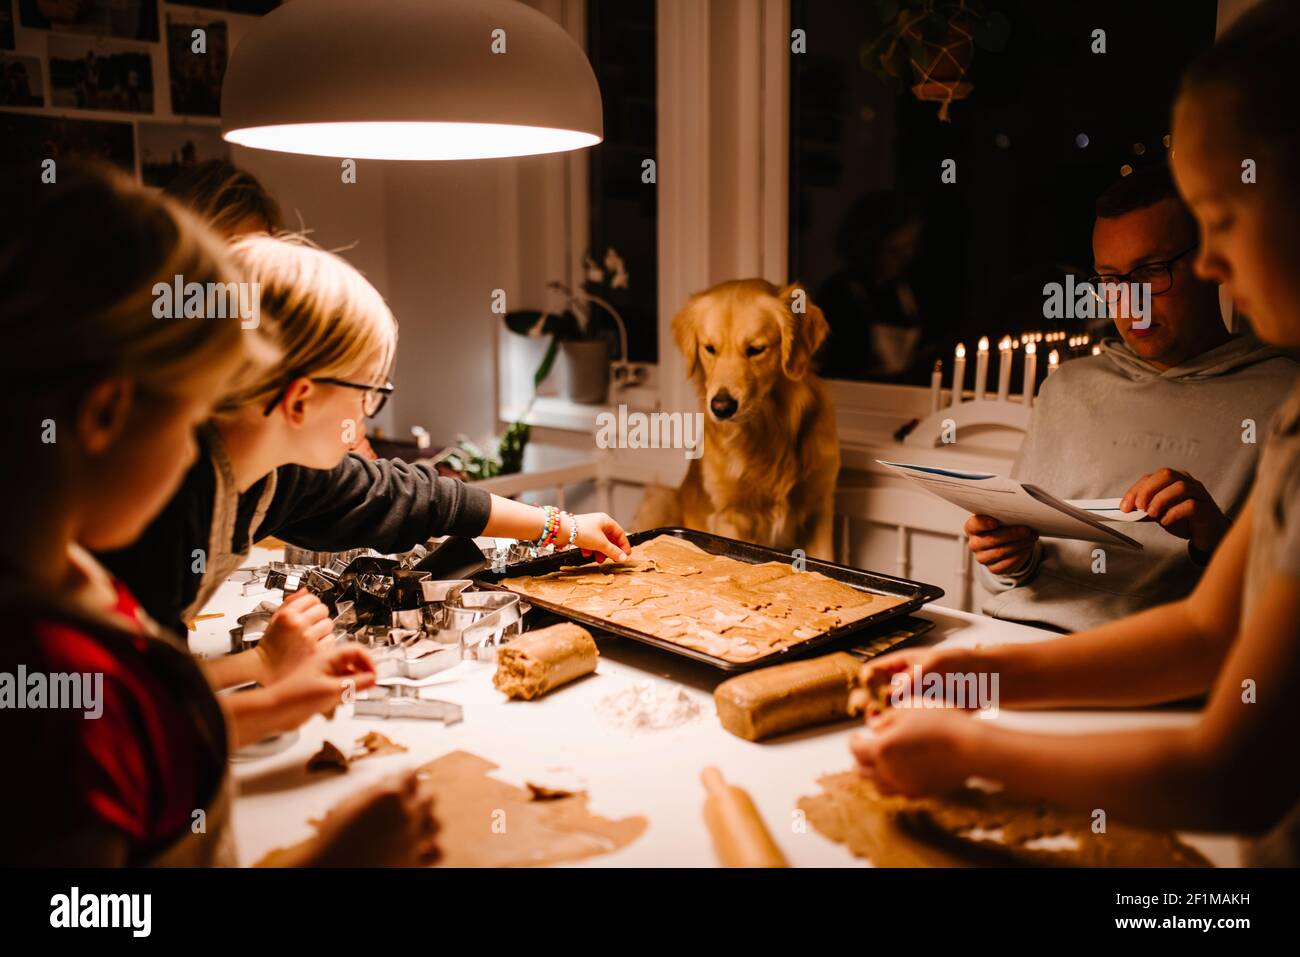 Family at table preparing gingerbread Stock Photo